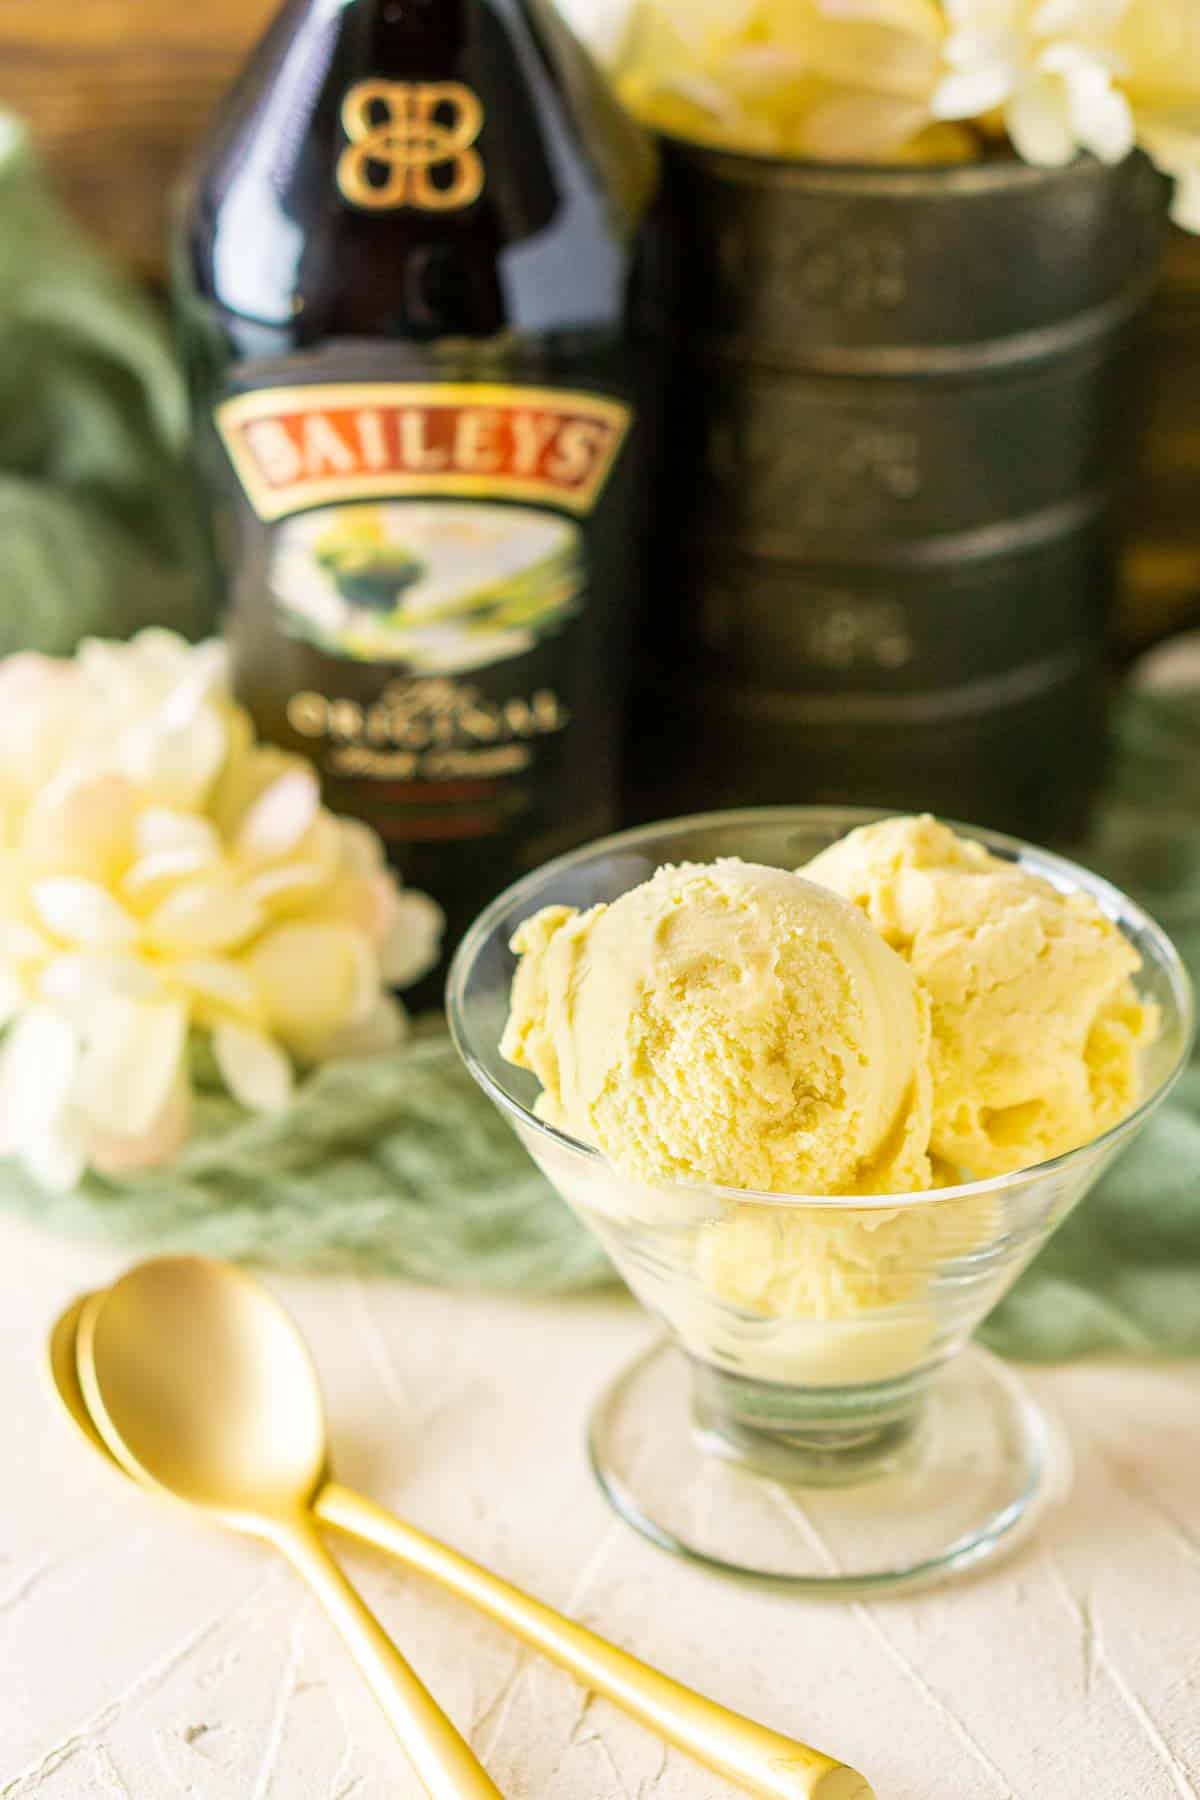 Two gold spoons stacked on top of each other next to a glass cup of Baileys ice cream.